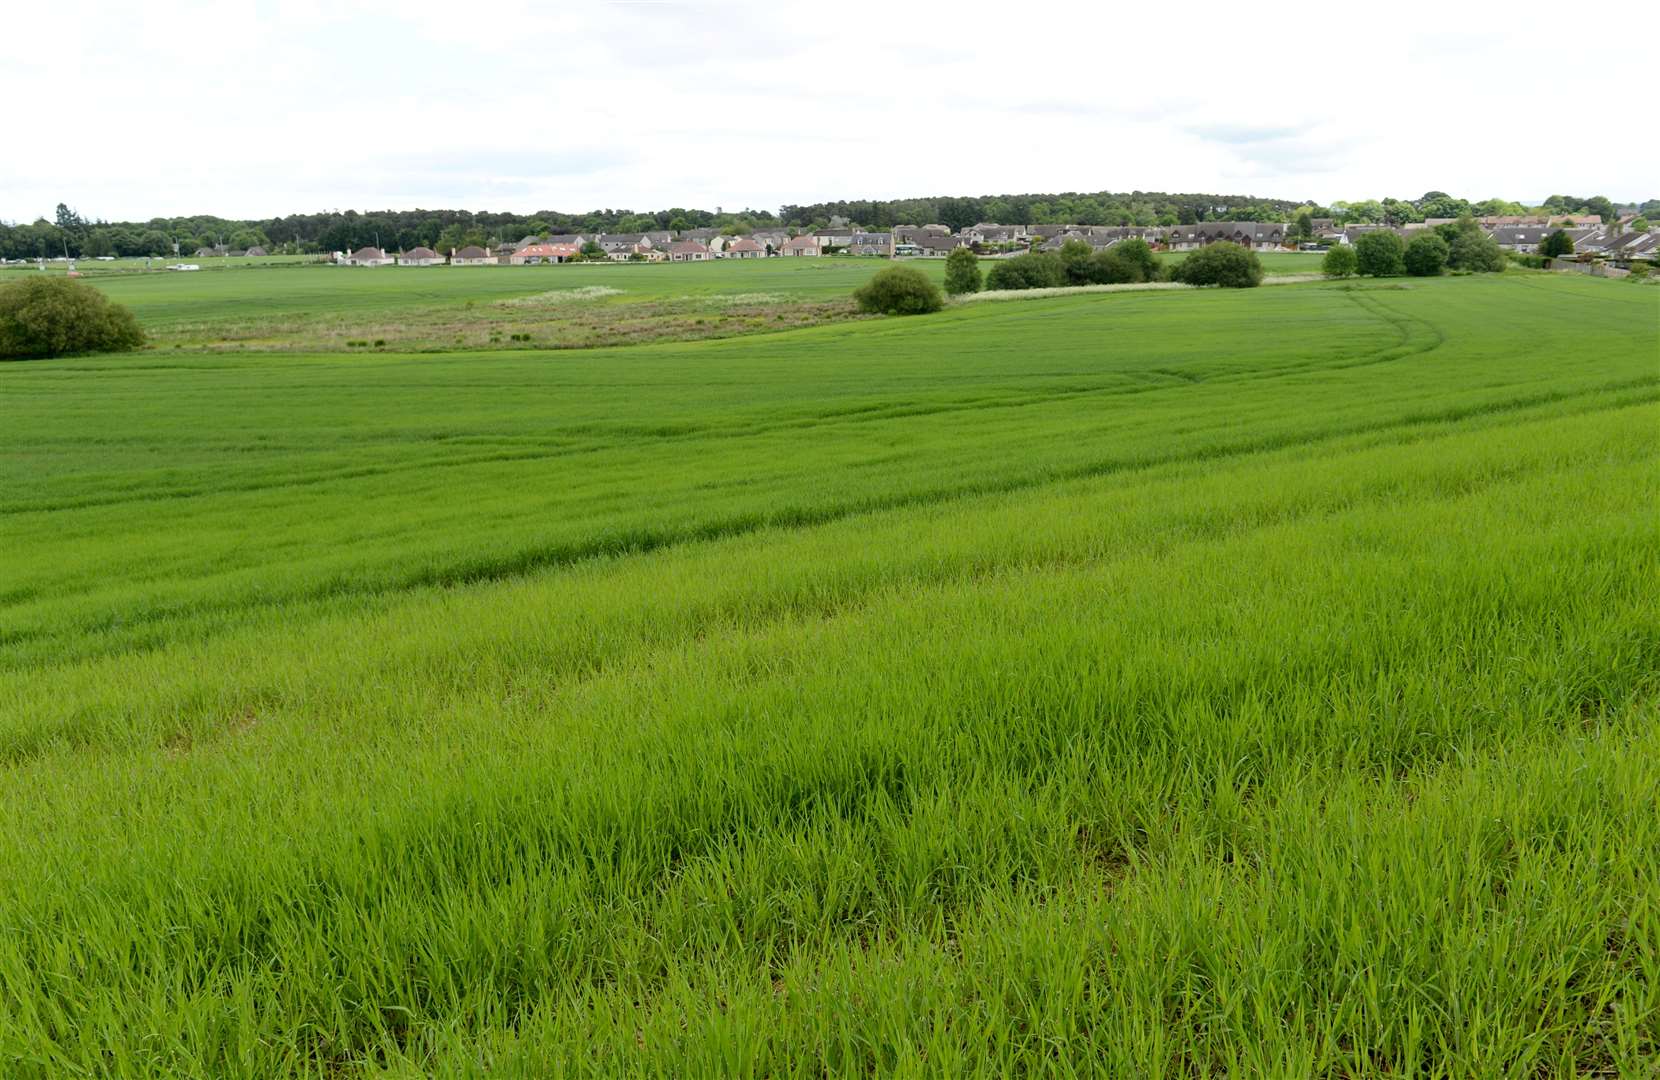 Plans are being discussed for the possible sell-off of land on the outskirts of Nairn.